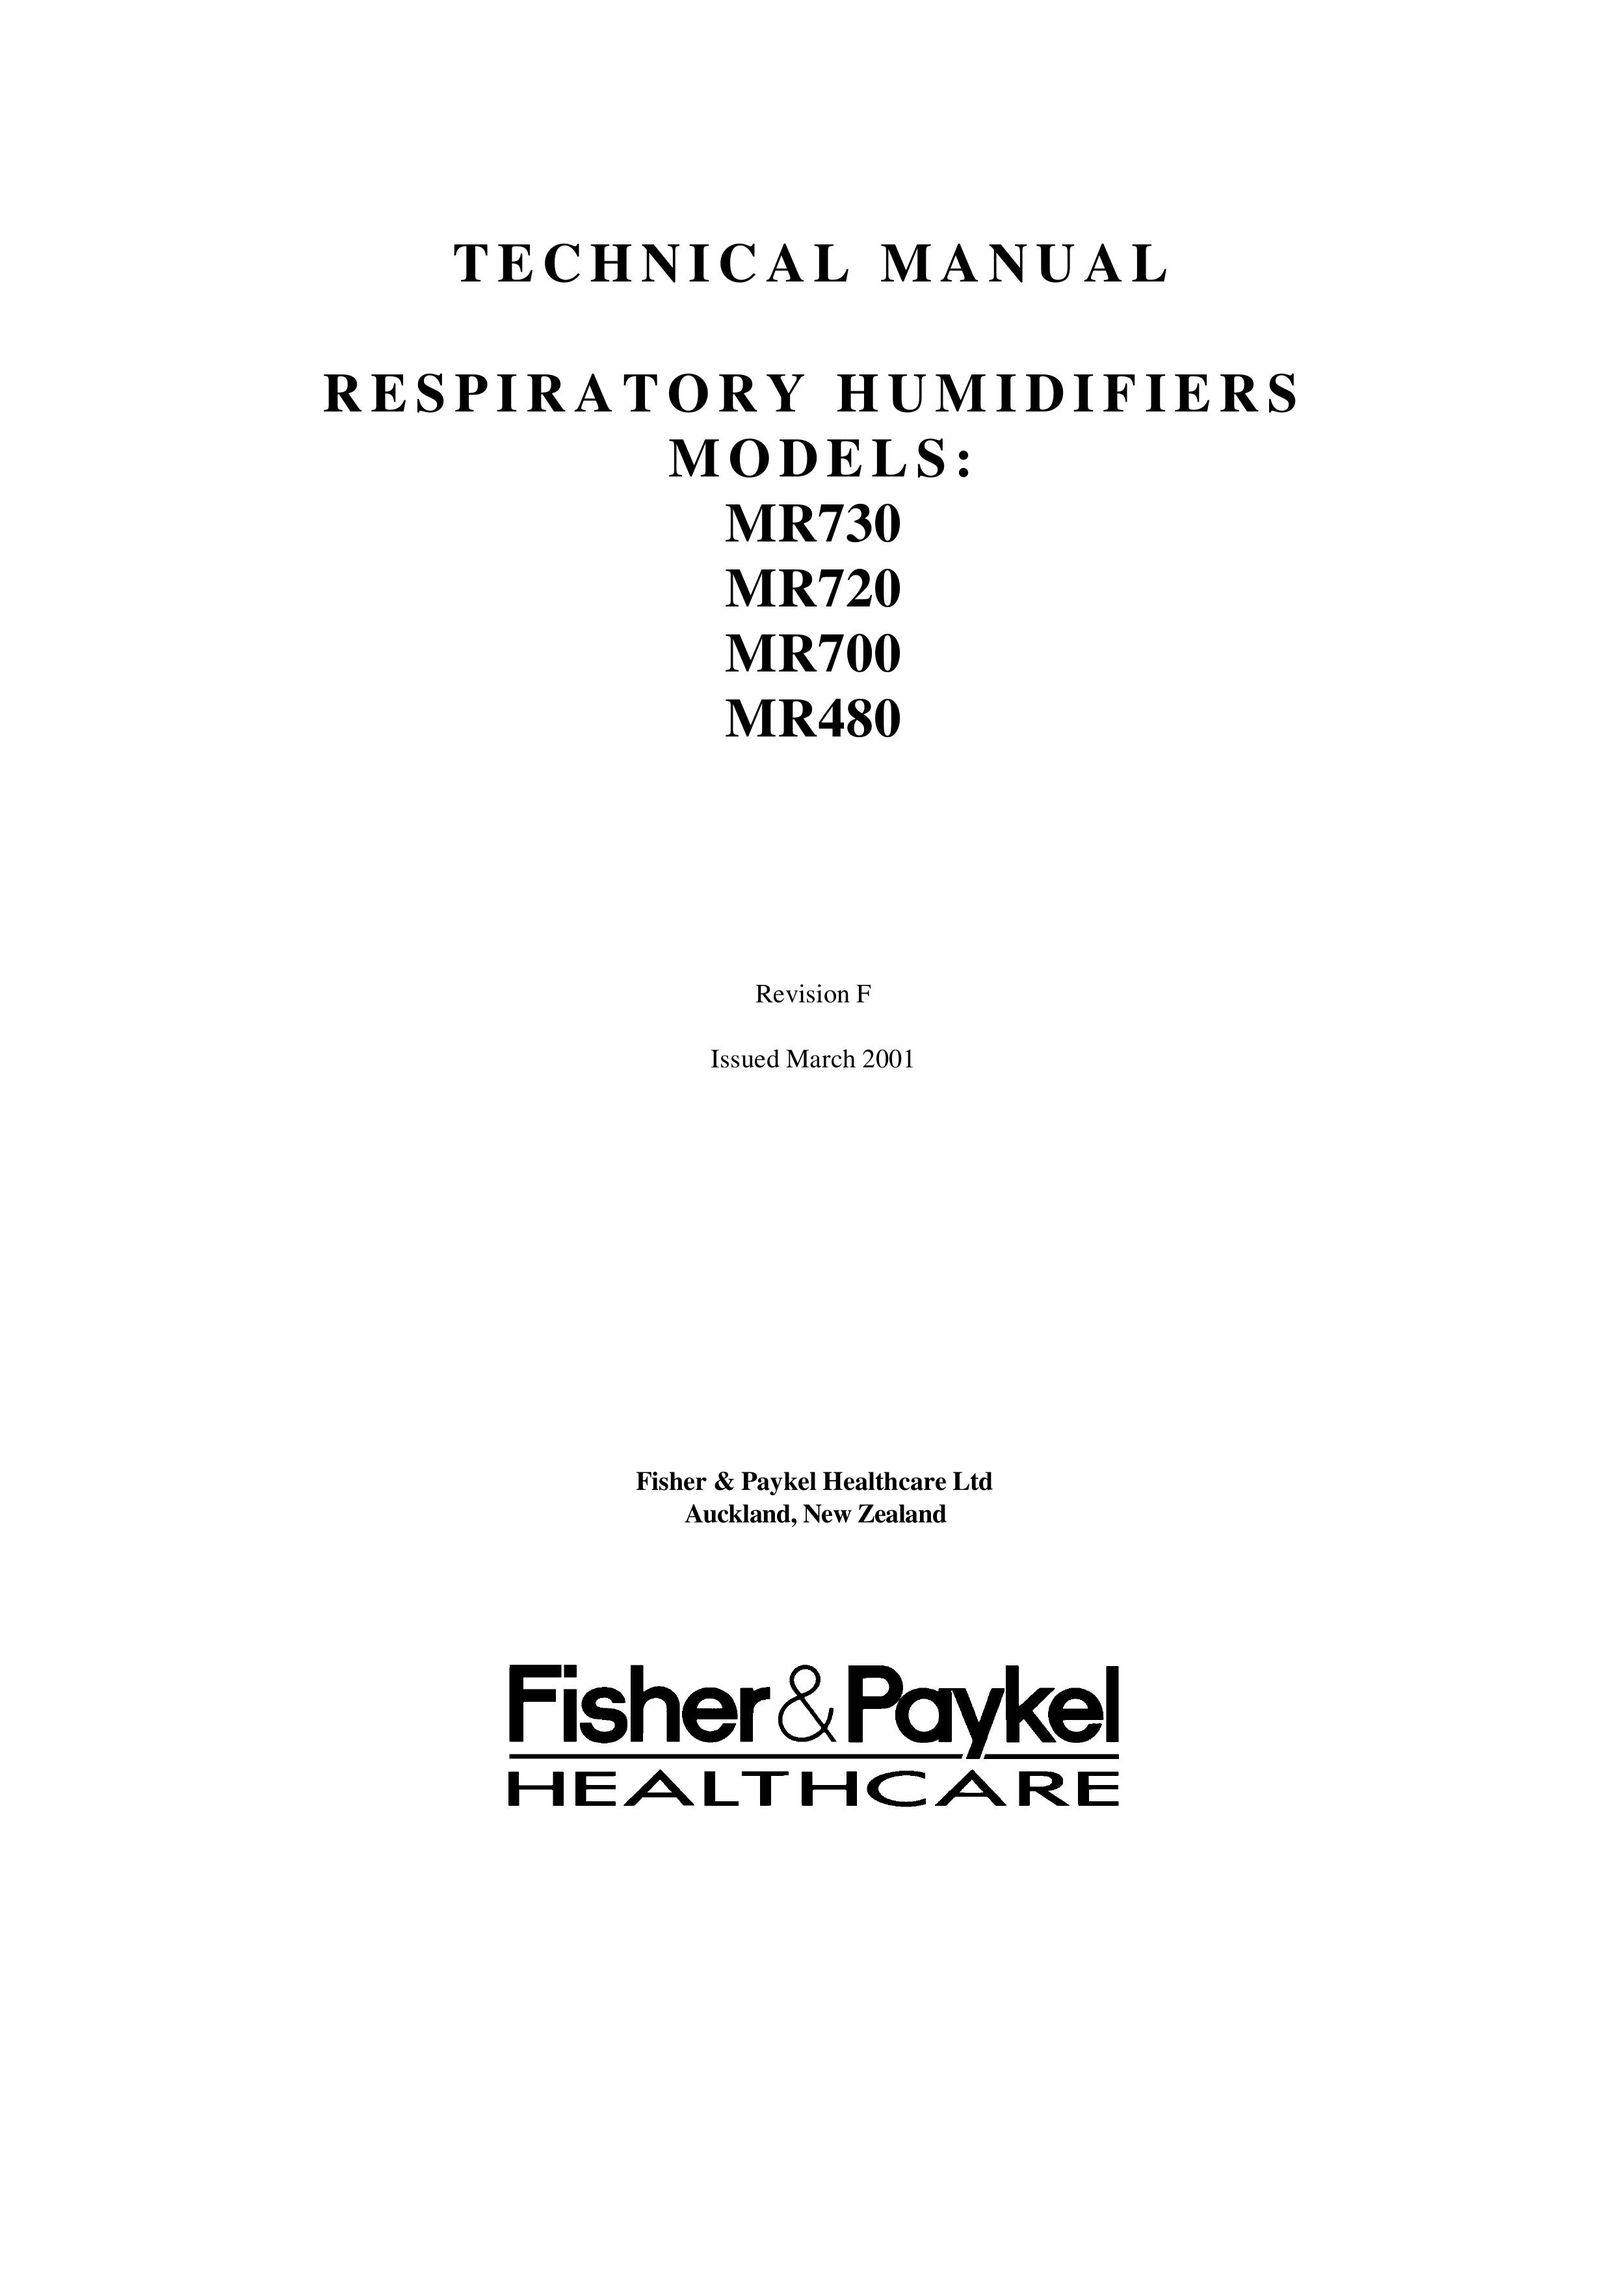 Fisher & Paykel MR720 Humidifier User Manual (Page 1)